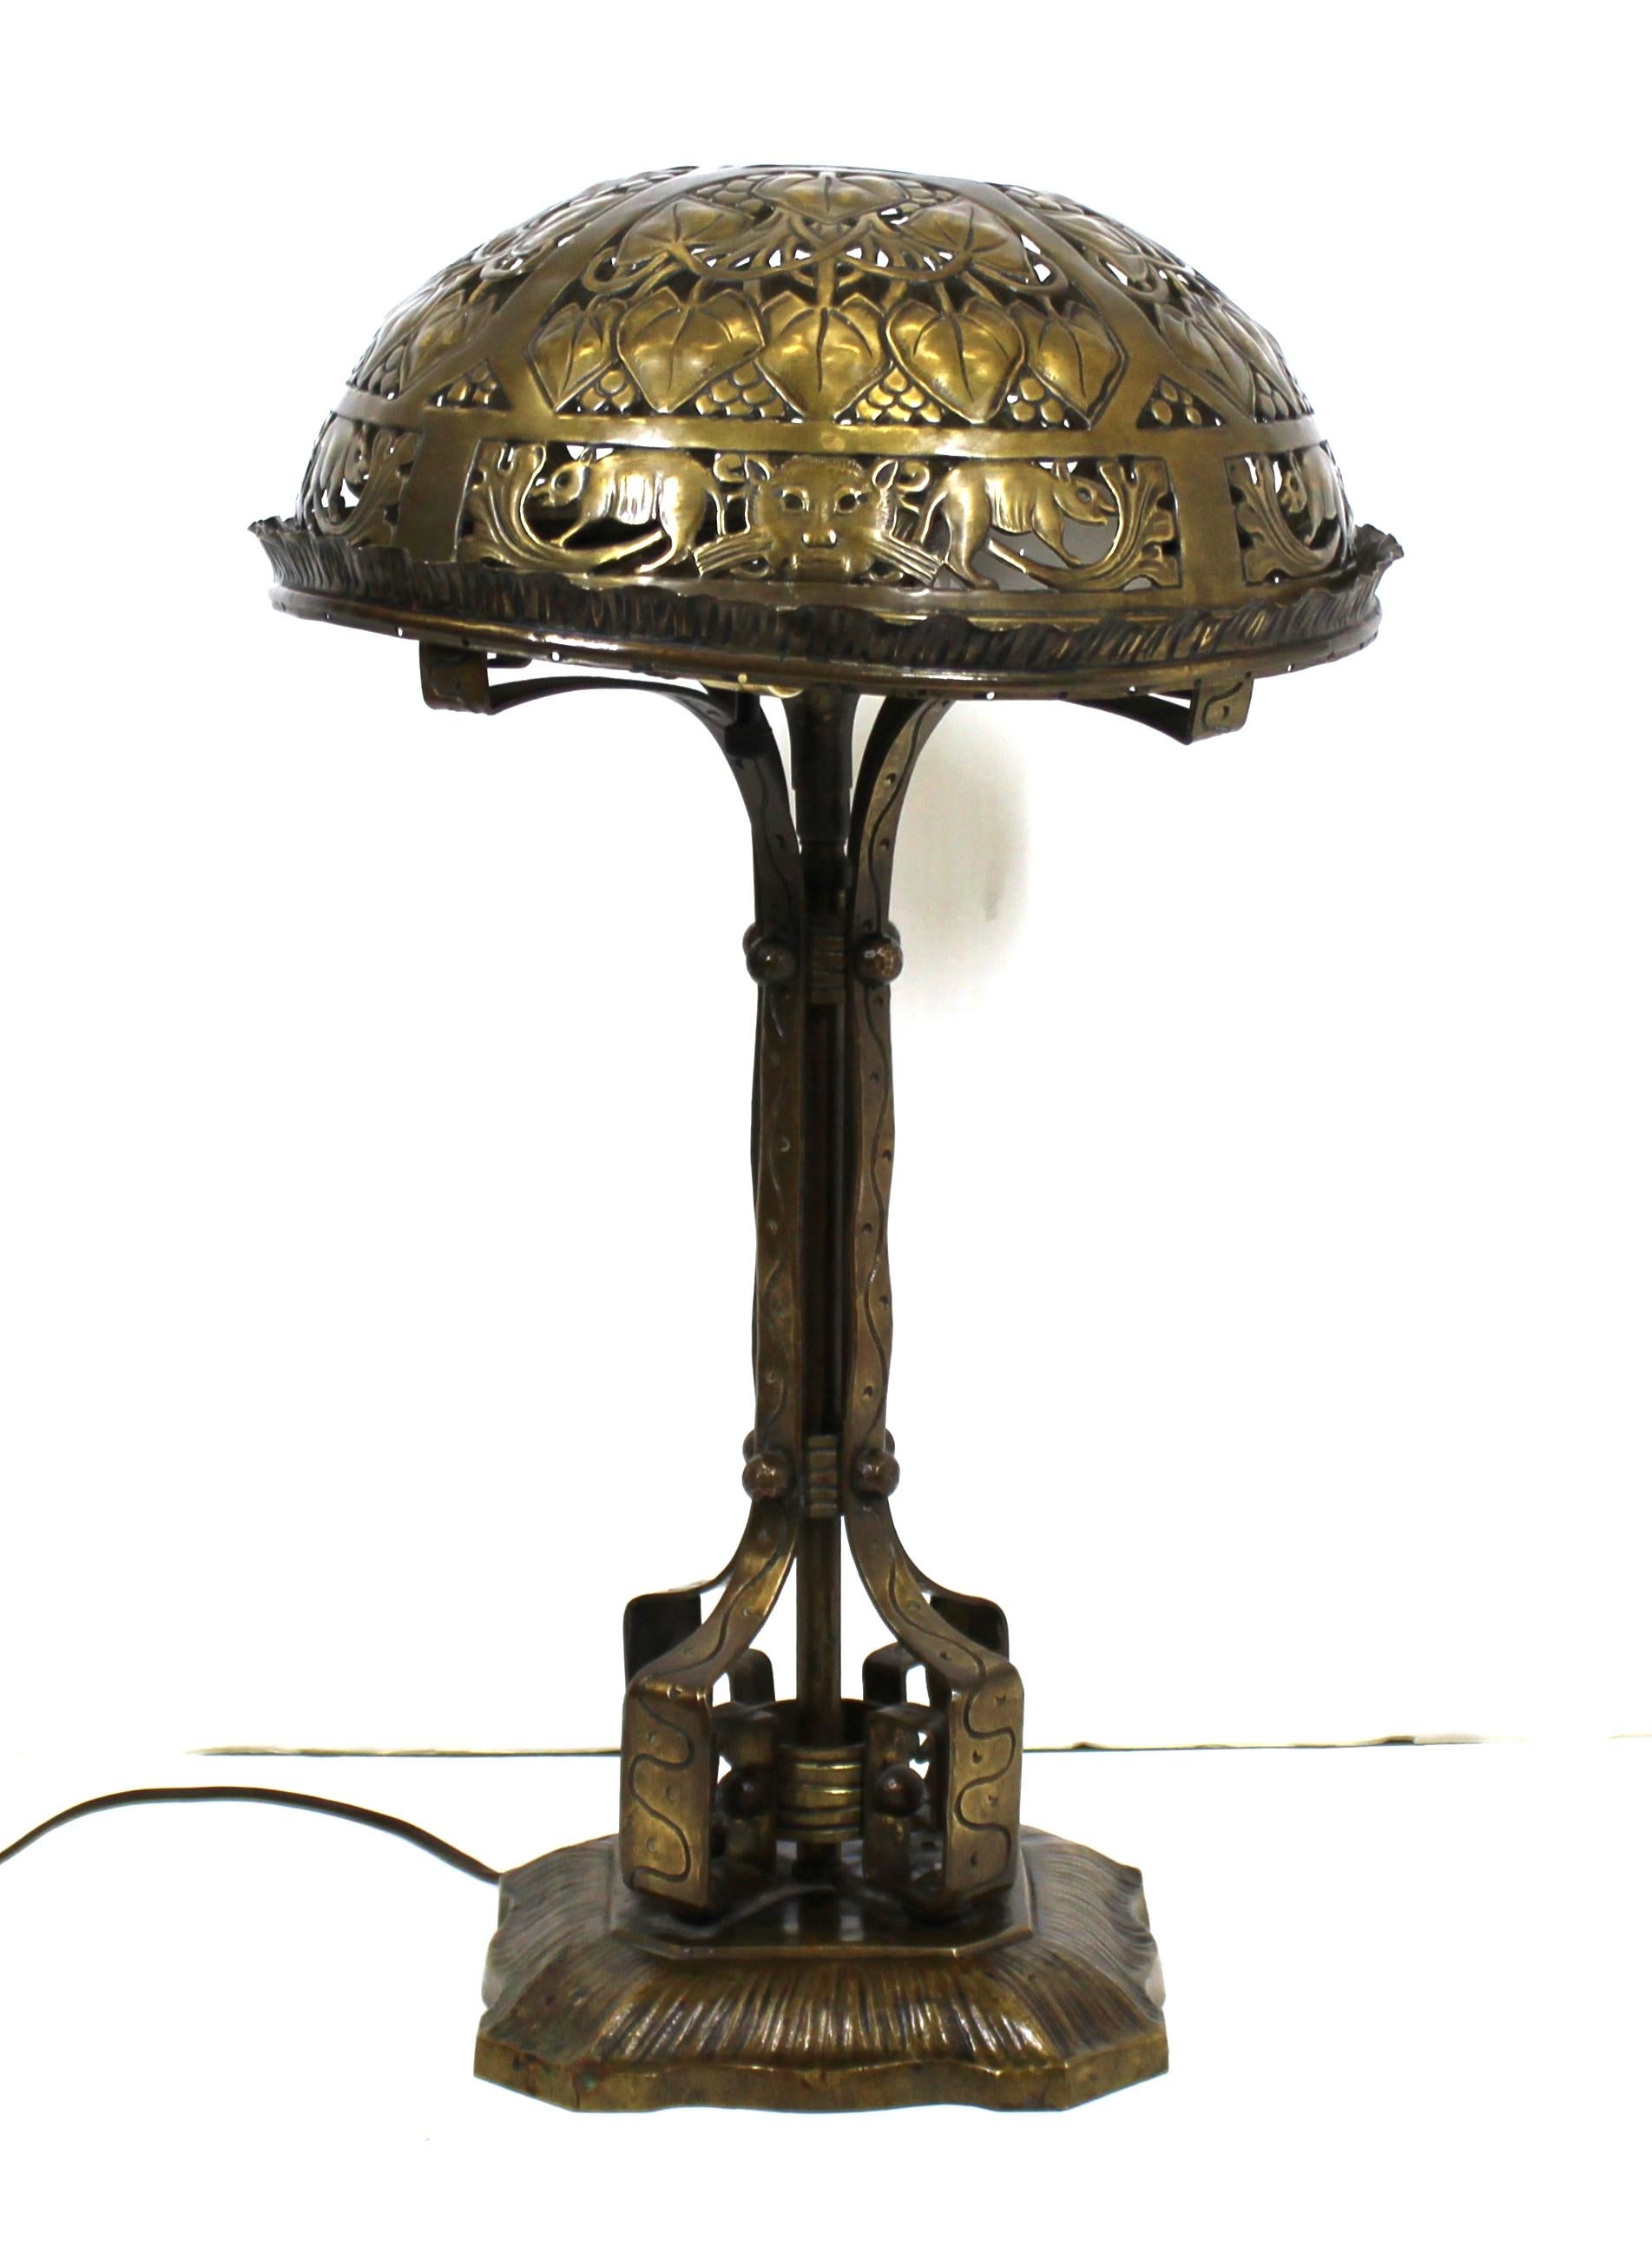 German Jugendstil table lamp in hand-repousse brass and bronze, attributed to Oscar Bach. The piece features decorative cats and mice on its shade and has two-light sockets. Made in circa 1900 in Germany, the piece is in remarkable antique condition